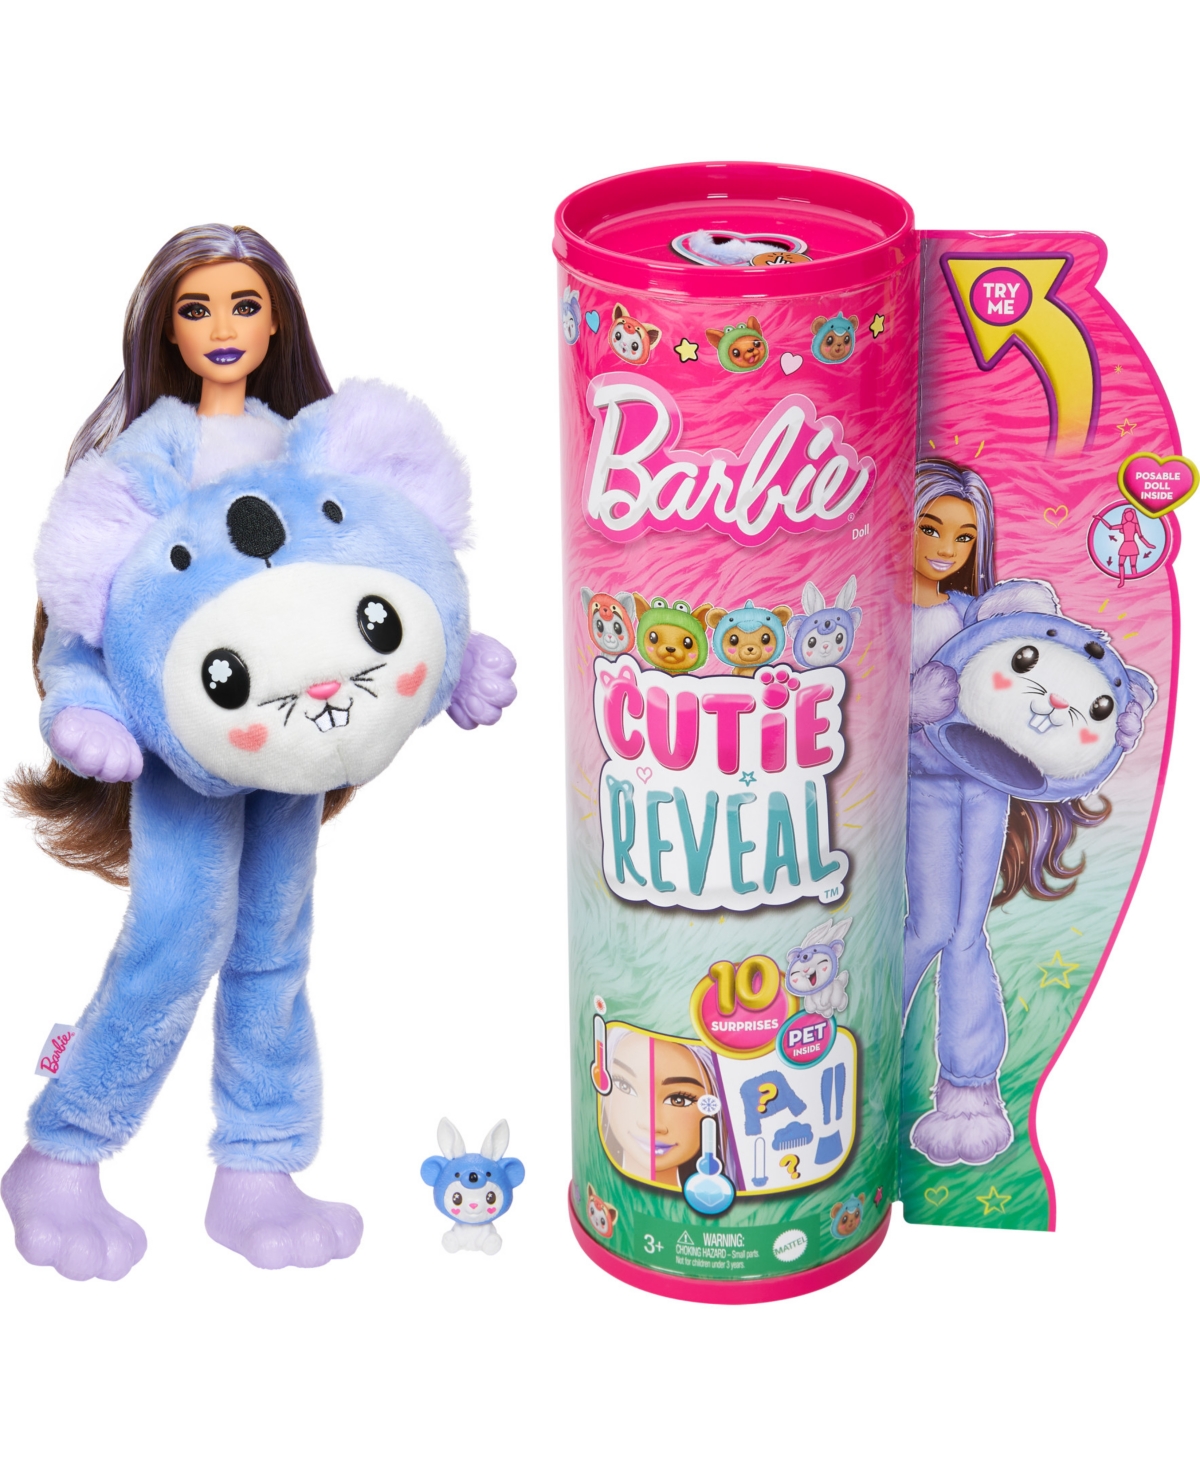 Barbie Kids' Cutie Reveal Costume-themed Doll And Accessories With 10 Surprises, Bunny As A Koala In Multi